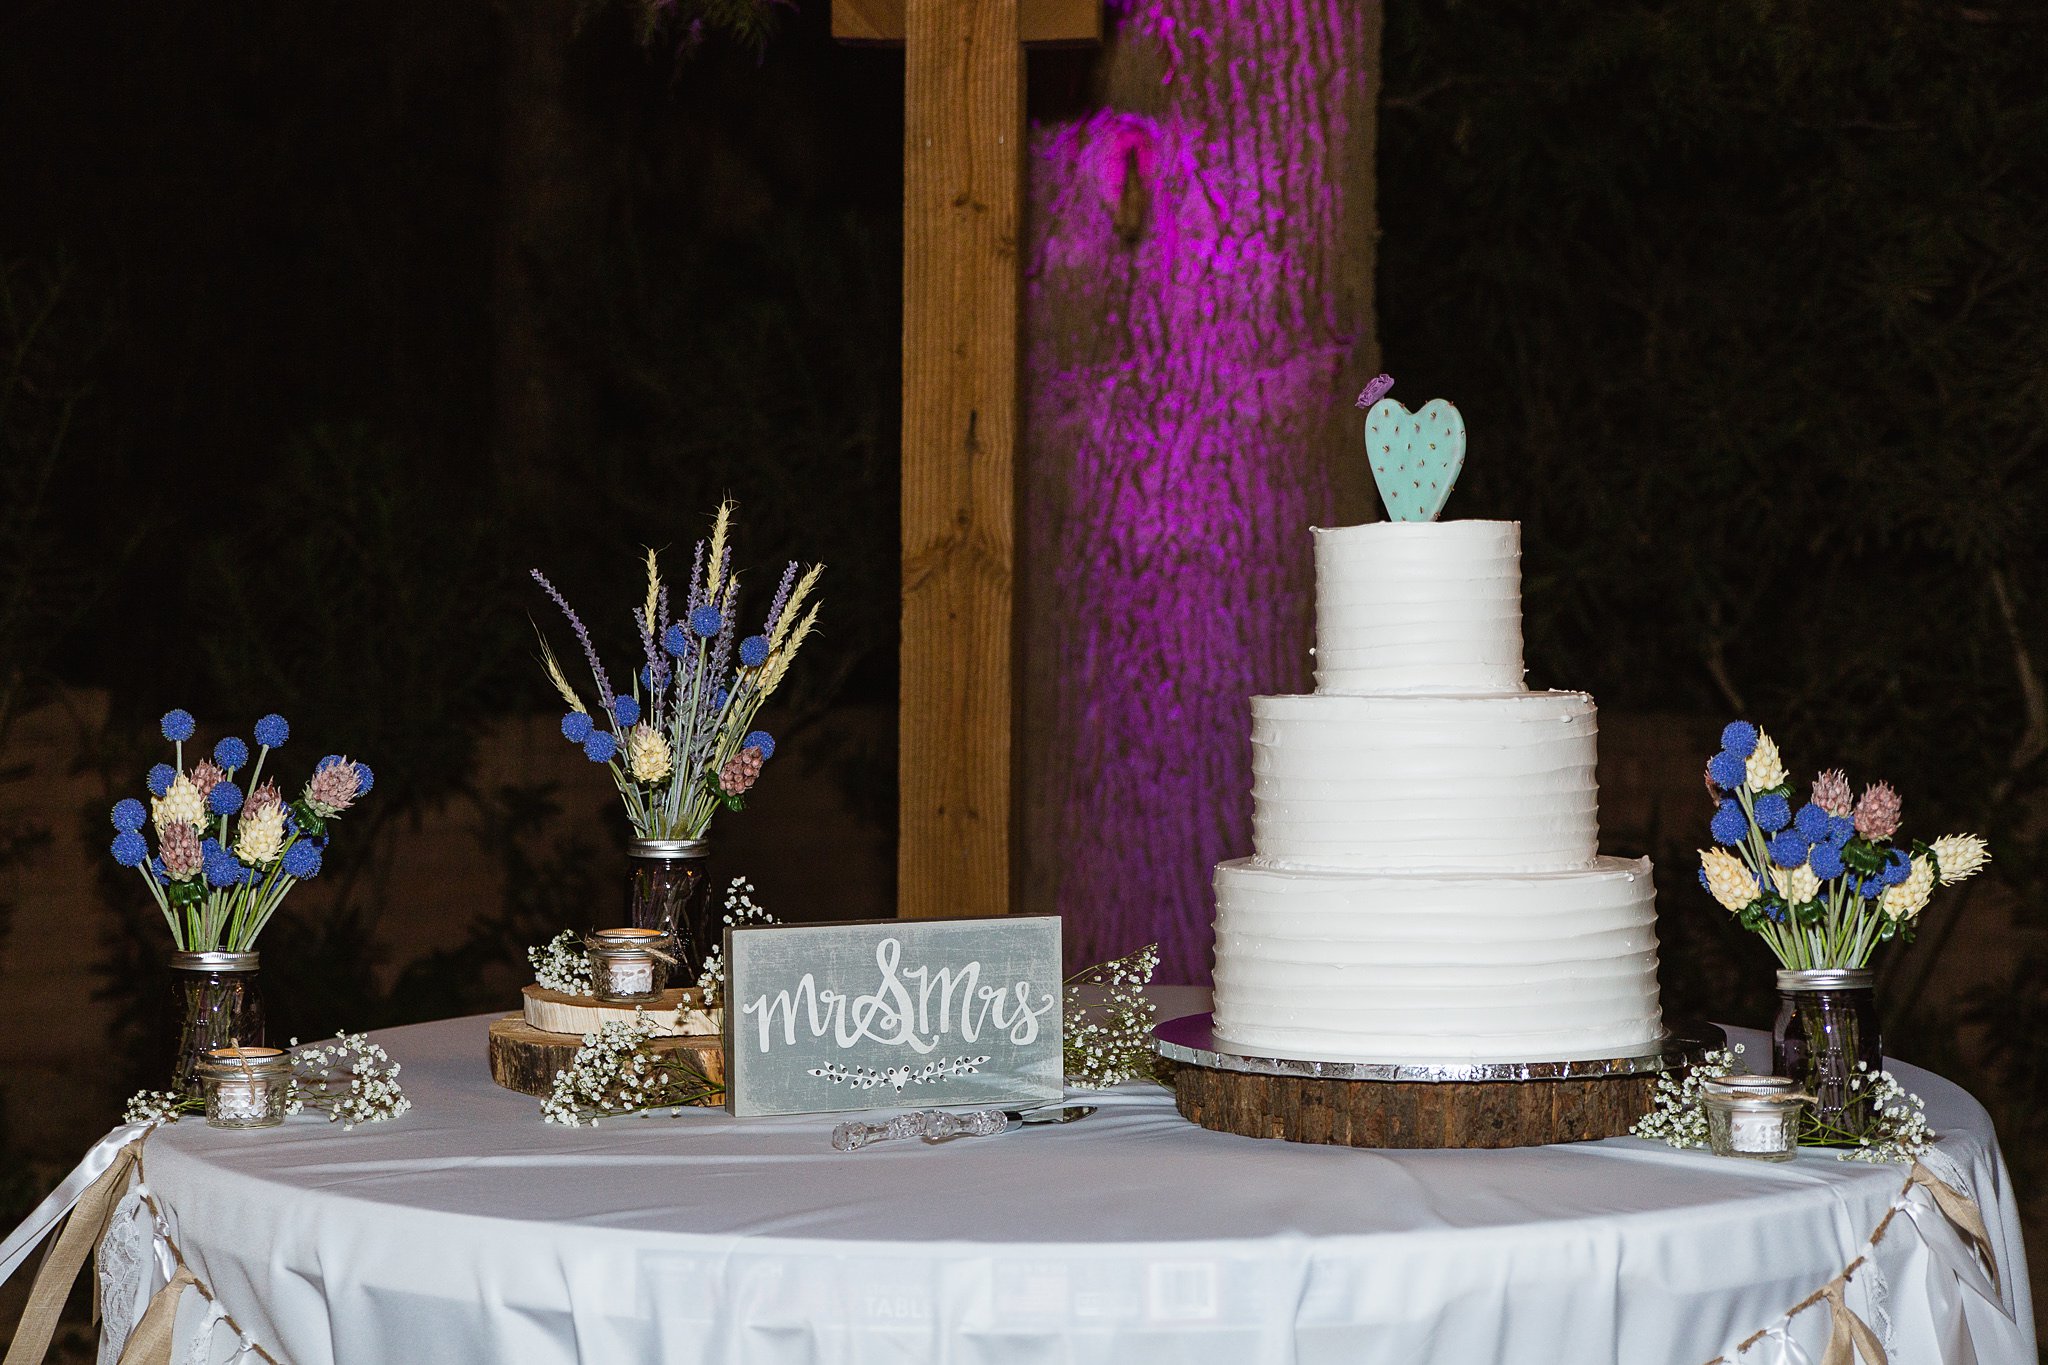 Simple rustic wedding cake topped with a purple cactus heart cake topper at rustic chic wedding reception by wedding photographers PMA Photography.